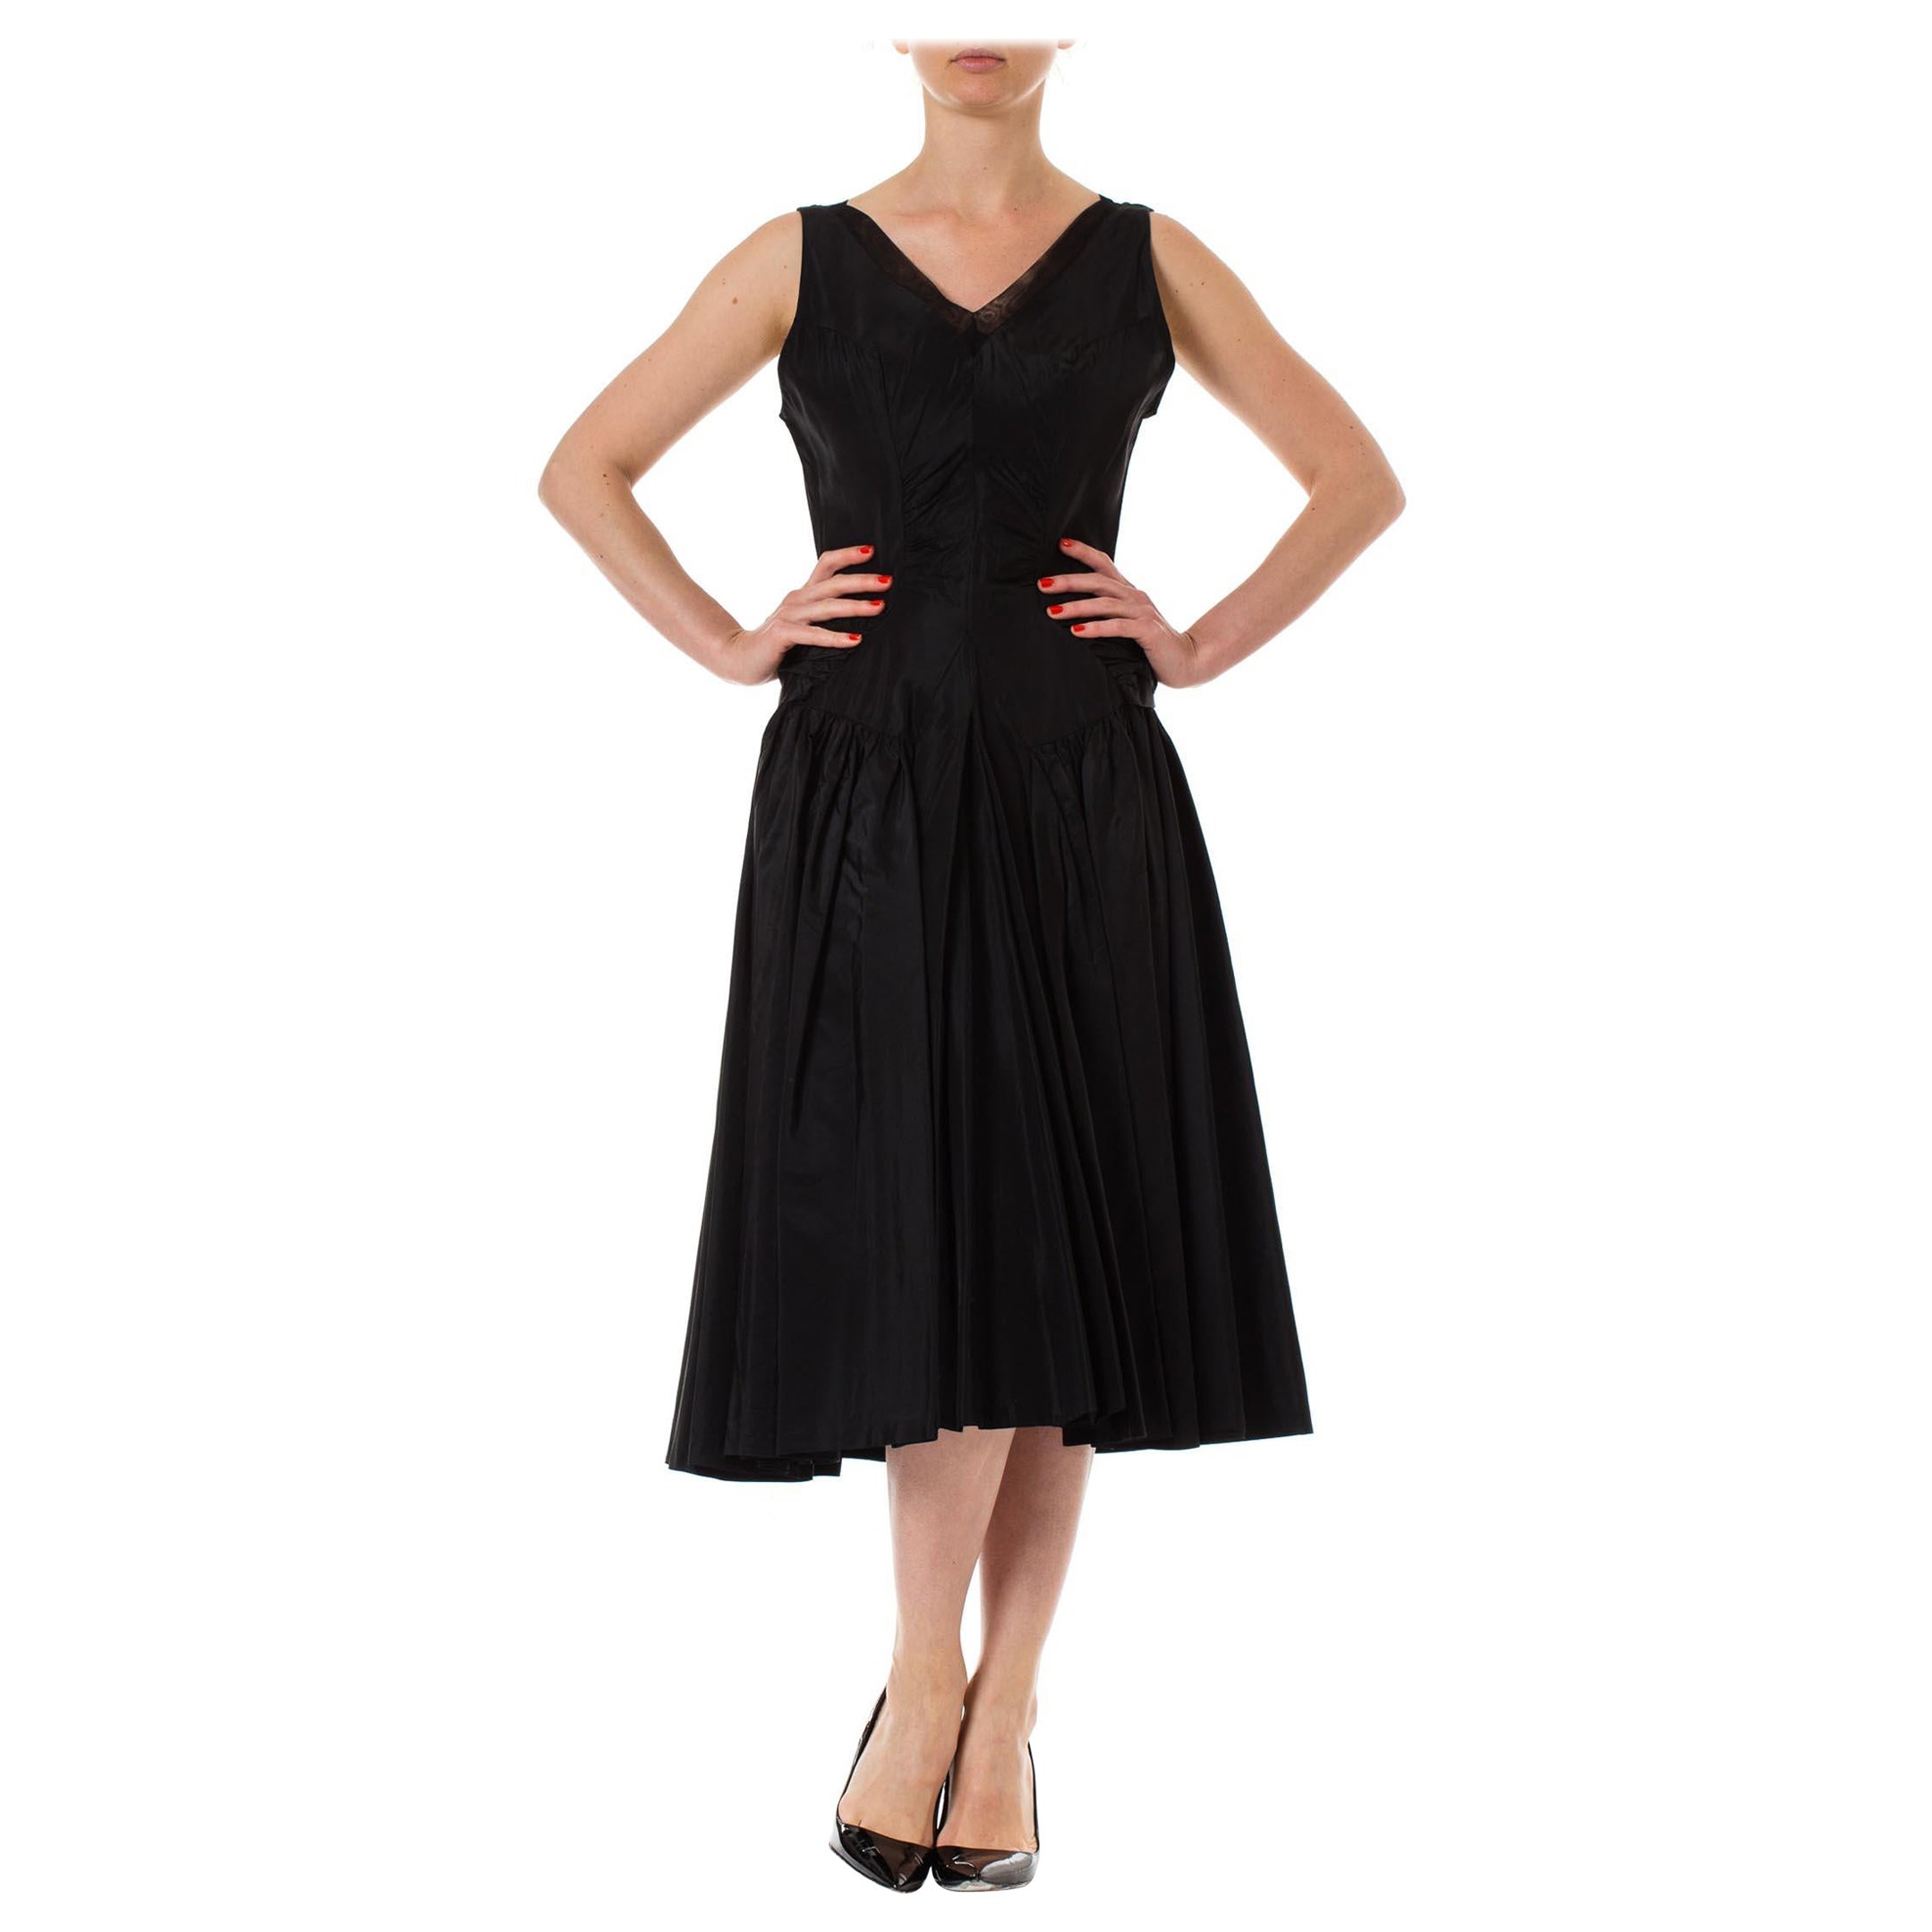 1950S Black Acetate Taffeta Swing Skirt Cocktail Dress With Unique Gathered Det For Sale